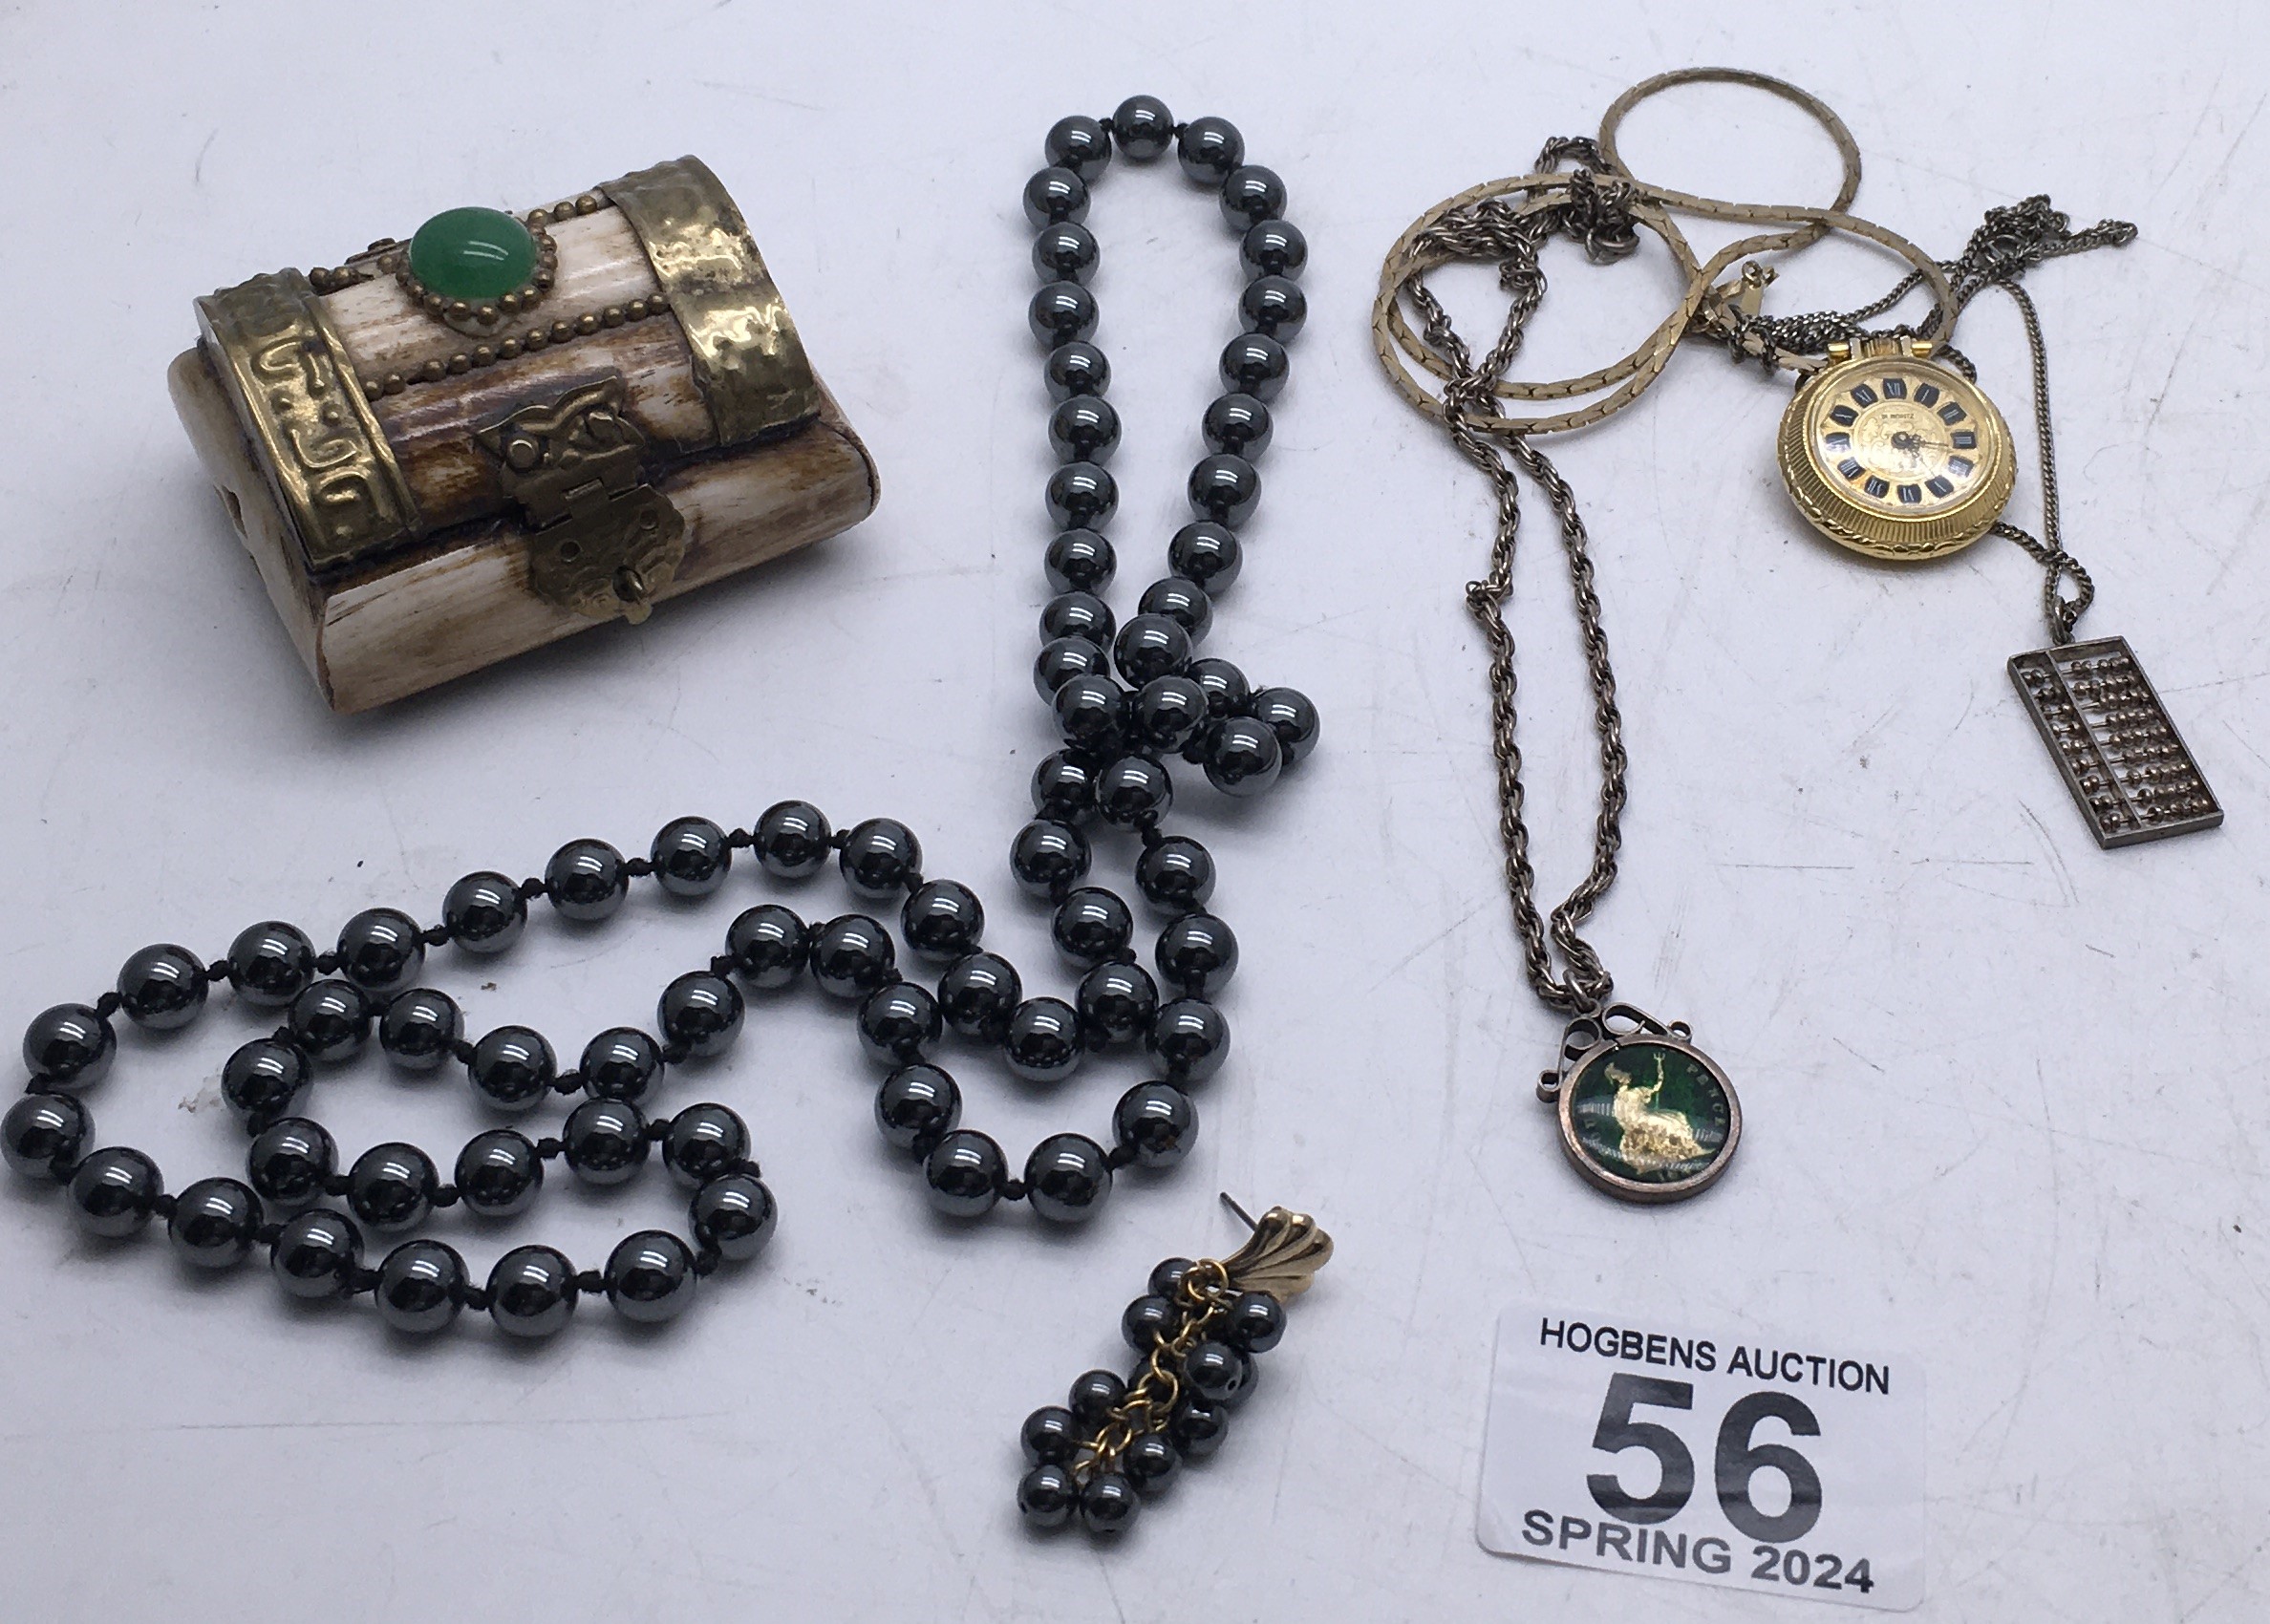 4 items including decorative watch and chain, silver chain with abacus attached